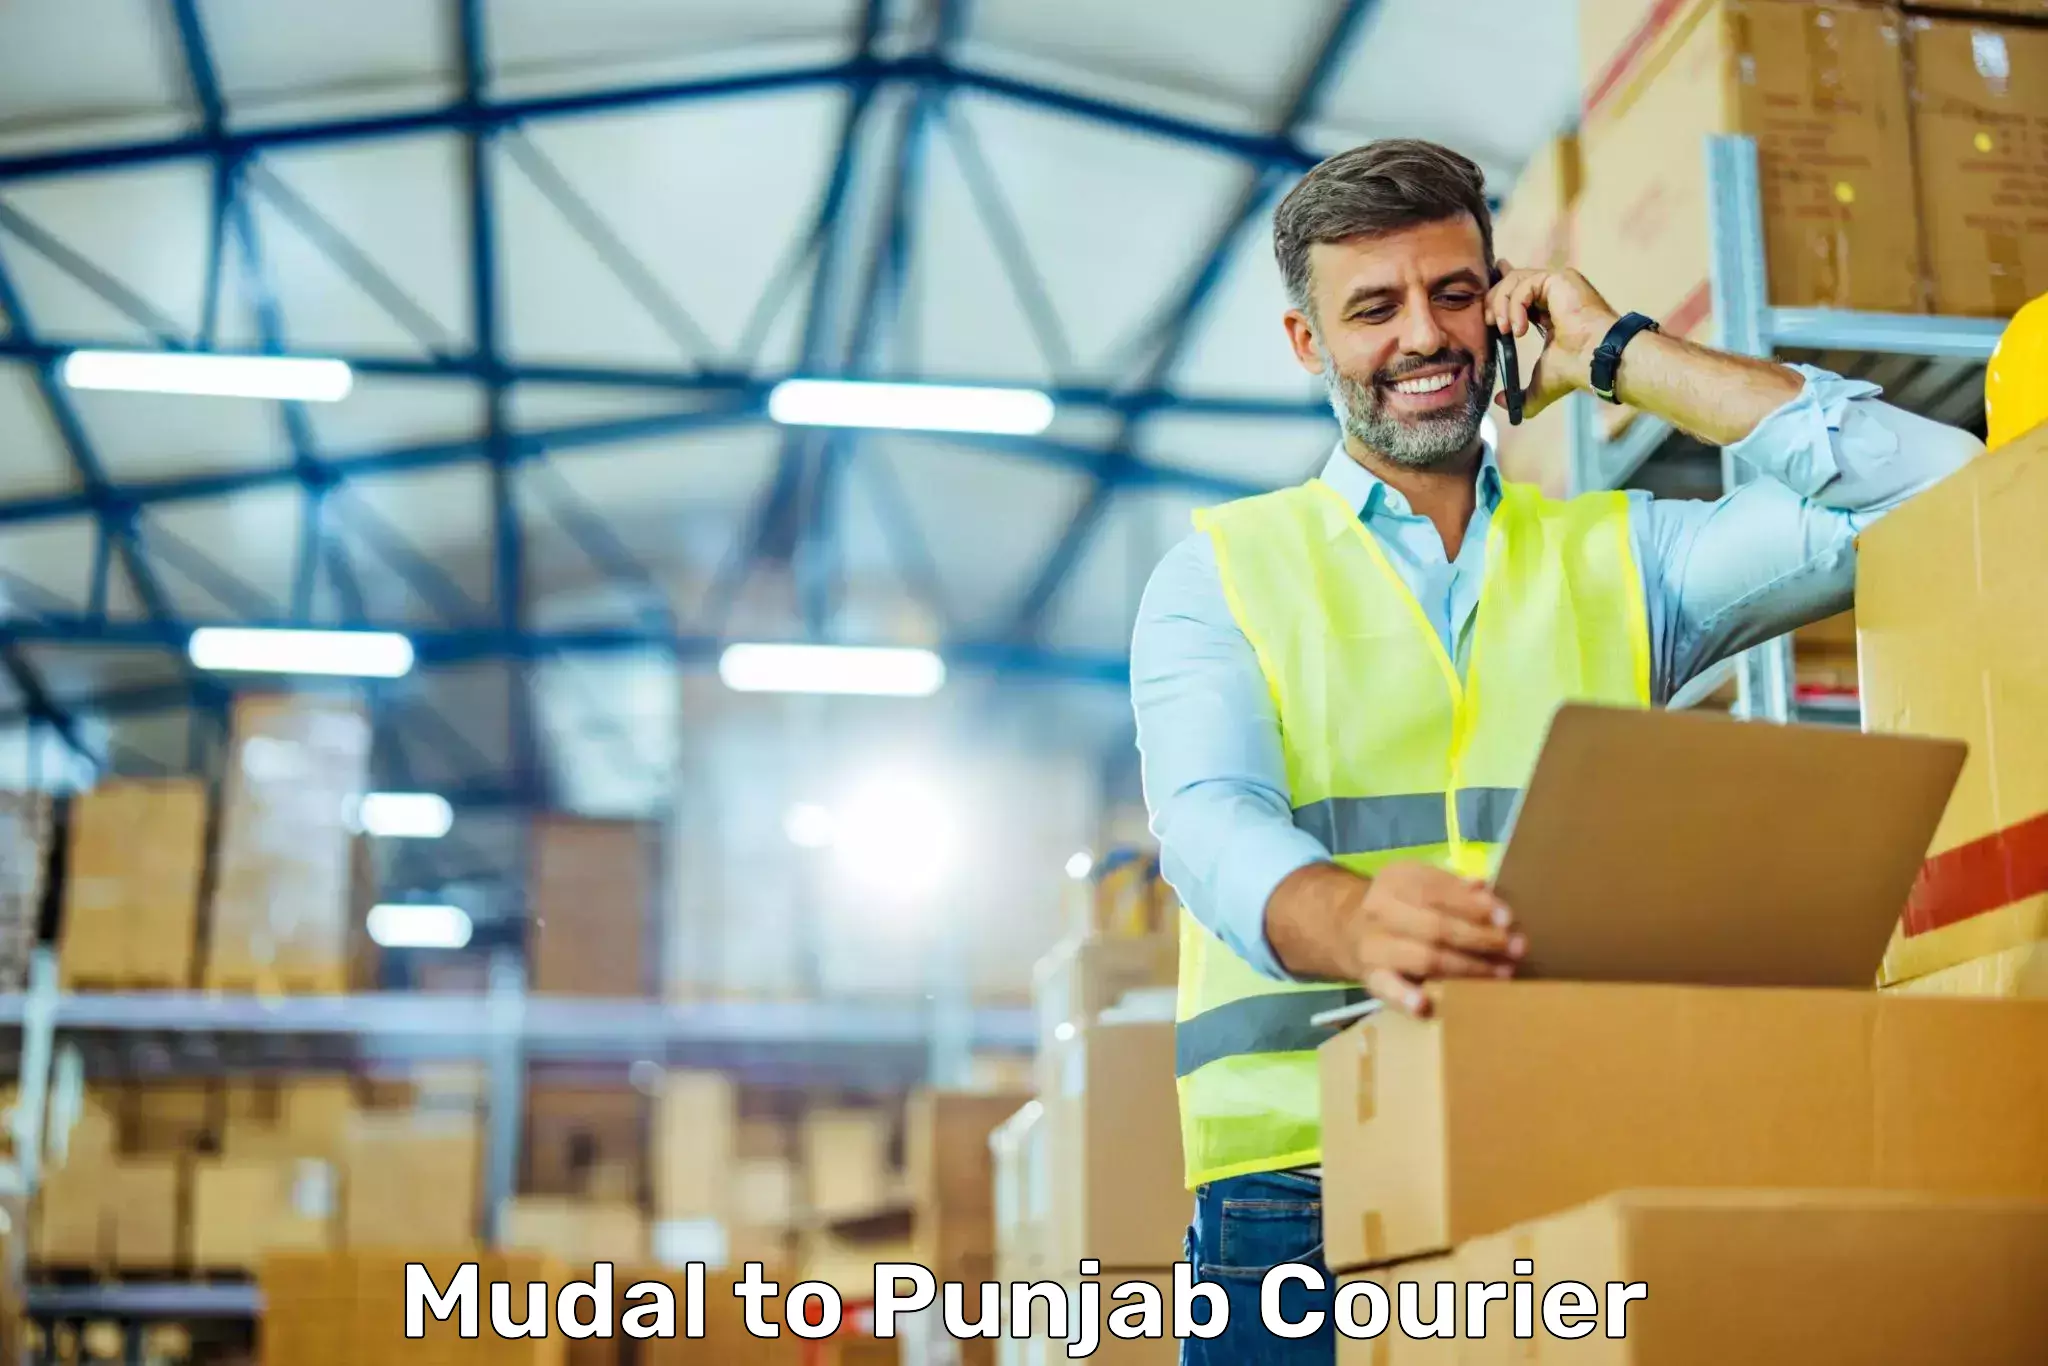 On-demand shipping options Mudal to Mohali